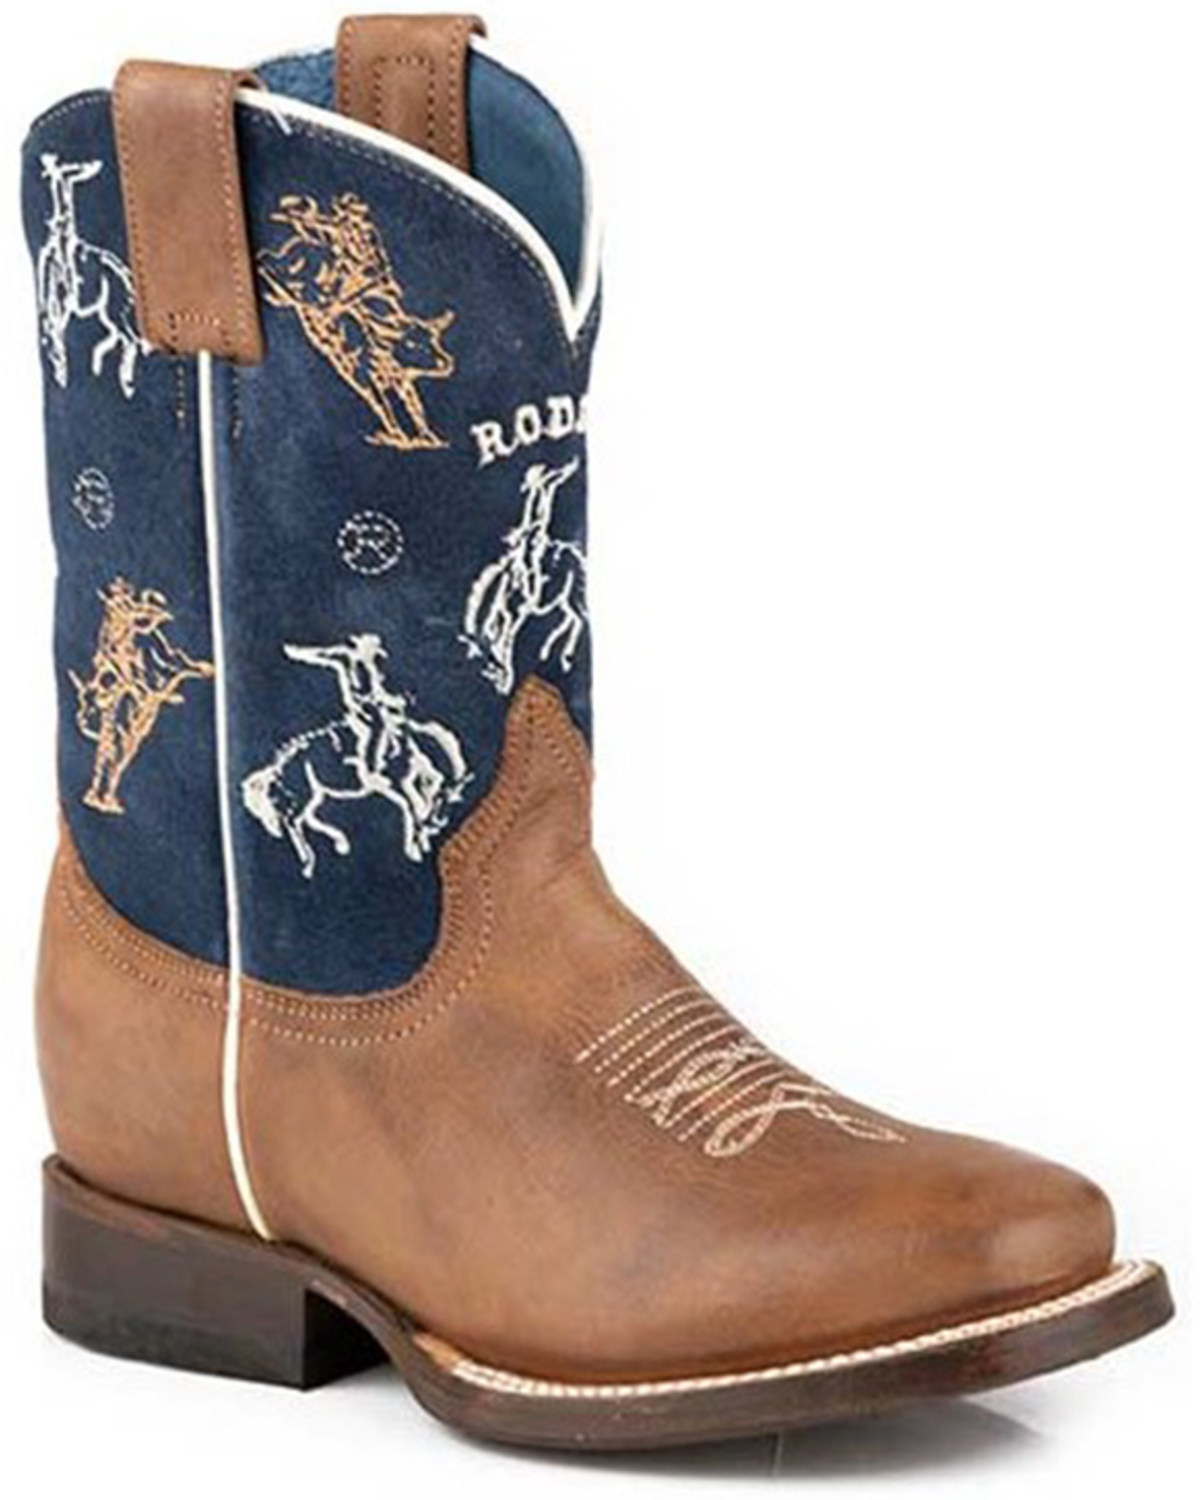 Roper Little Boys' Roughstock Western Boots - Square Toe